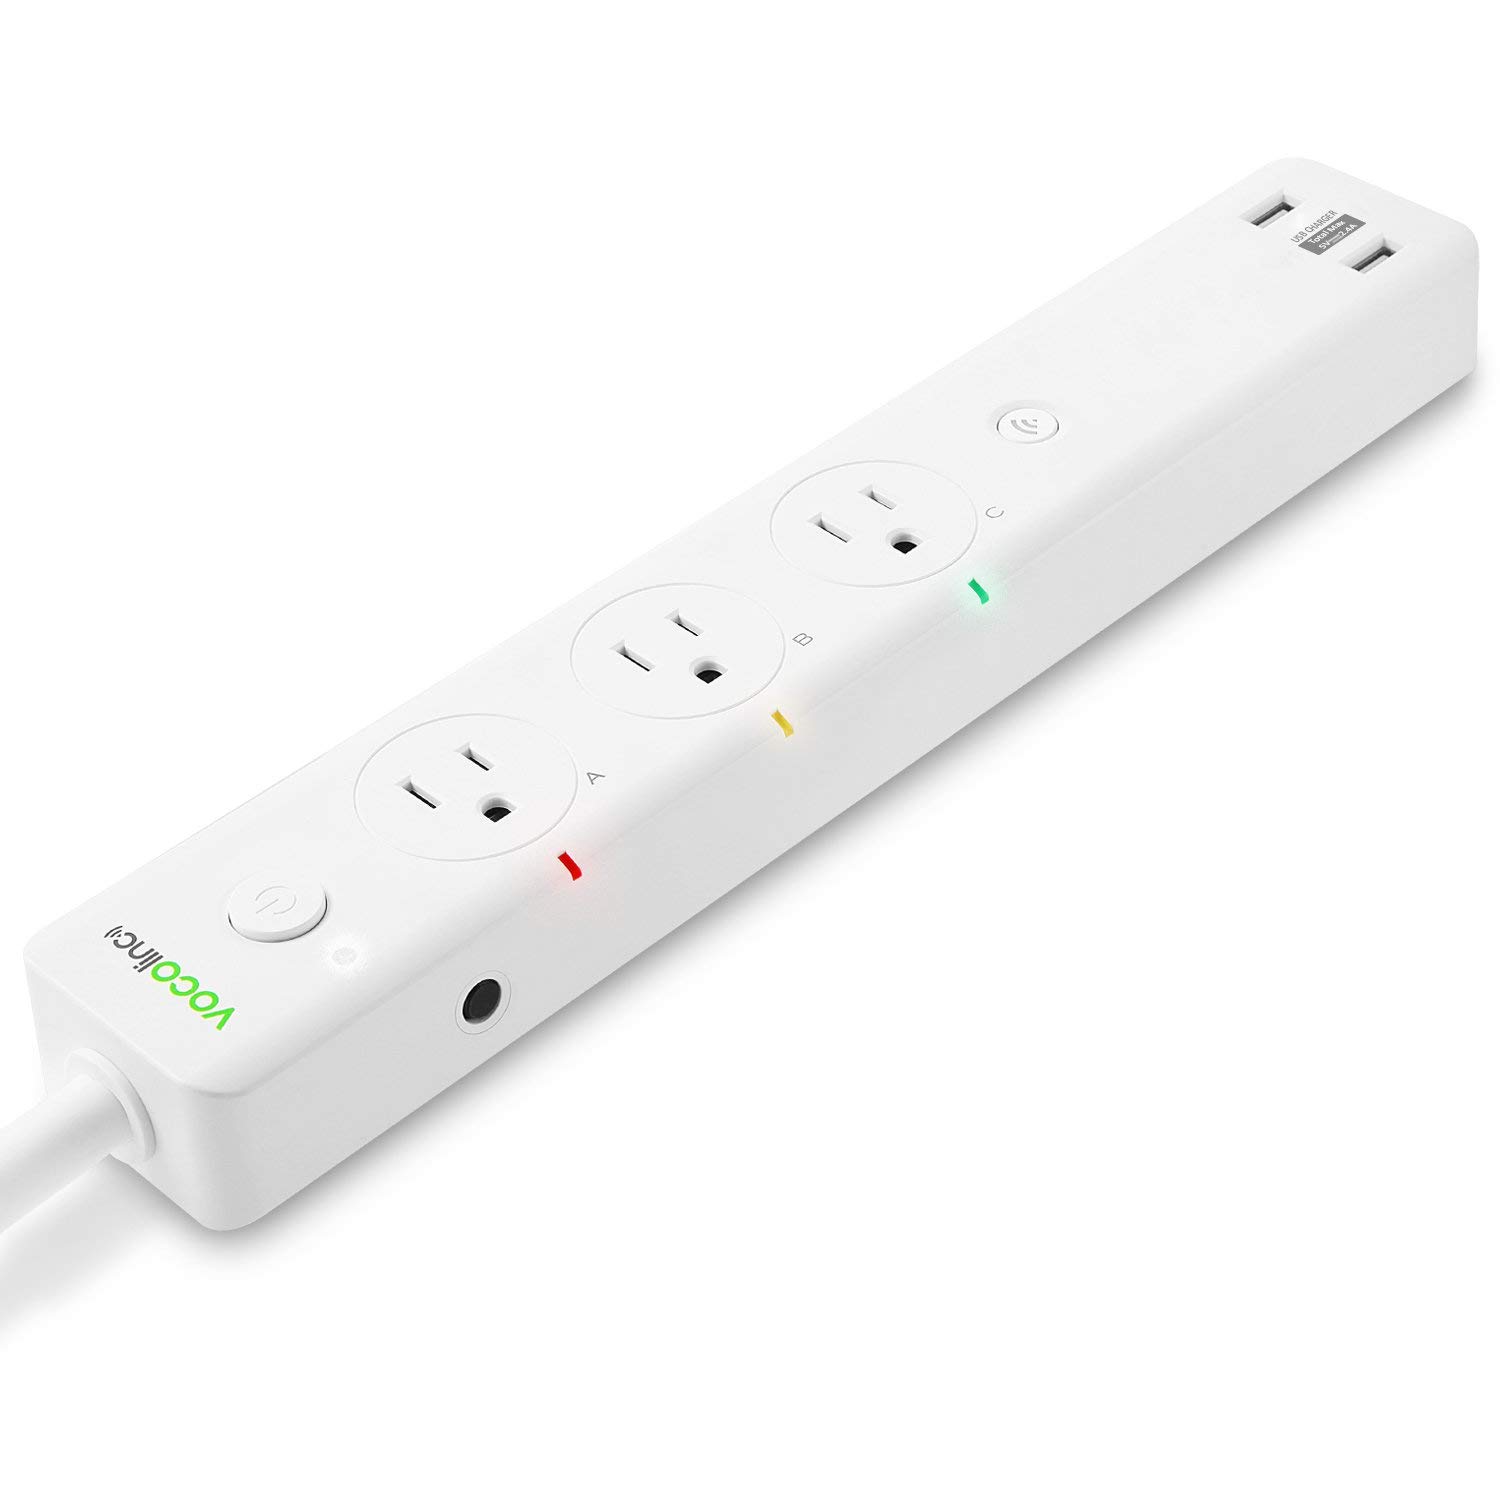 Vocolinc power strip to control lights by app with a disability. Homekit, Amazon Alexa and Google Home compatible.